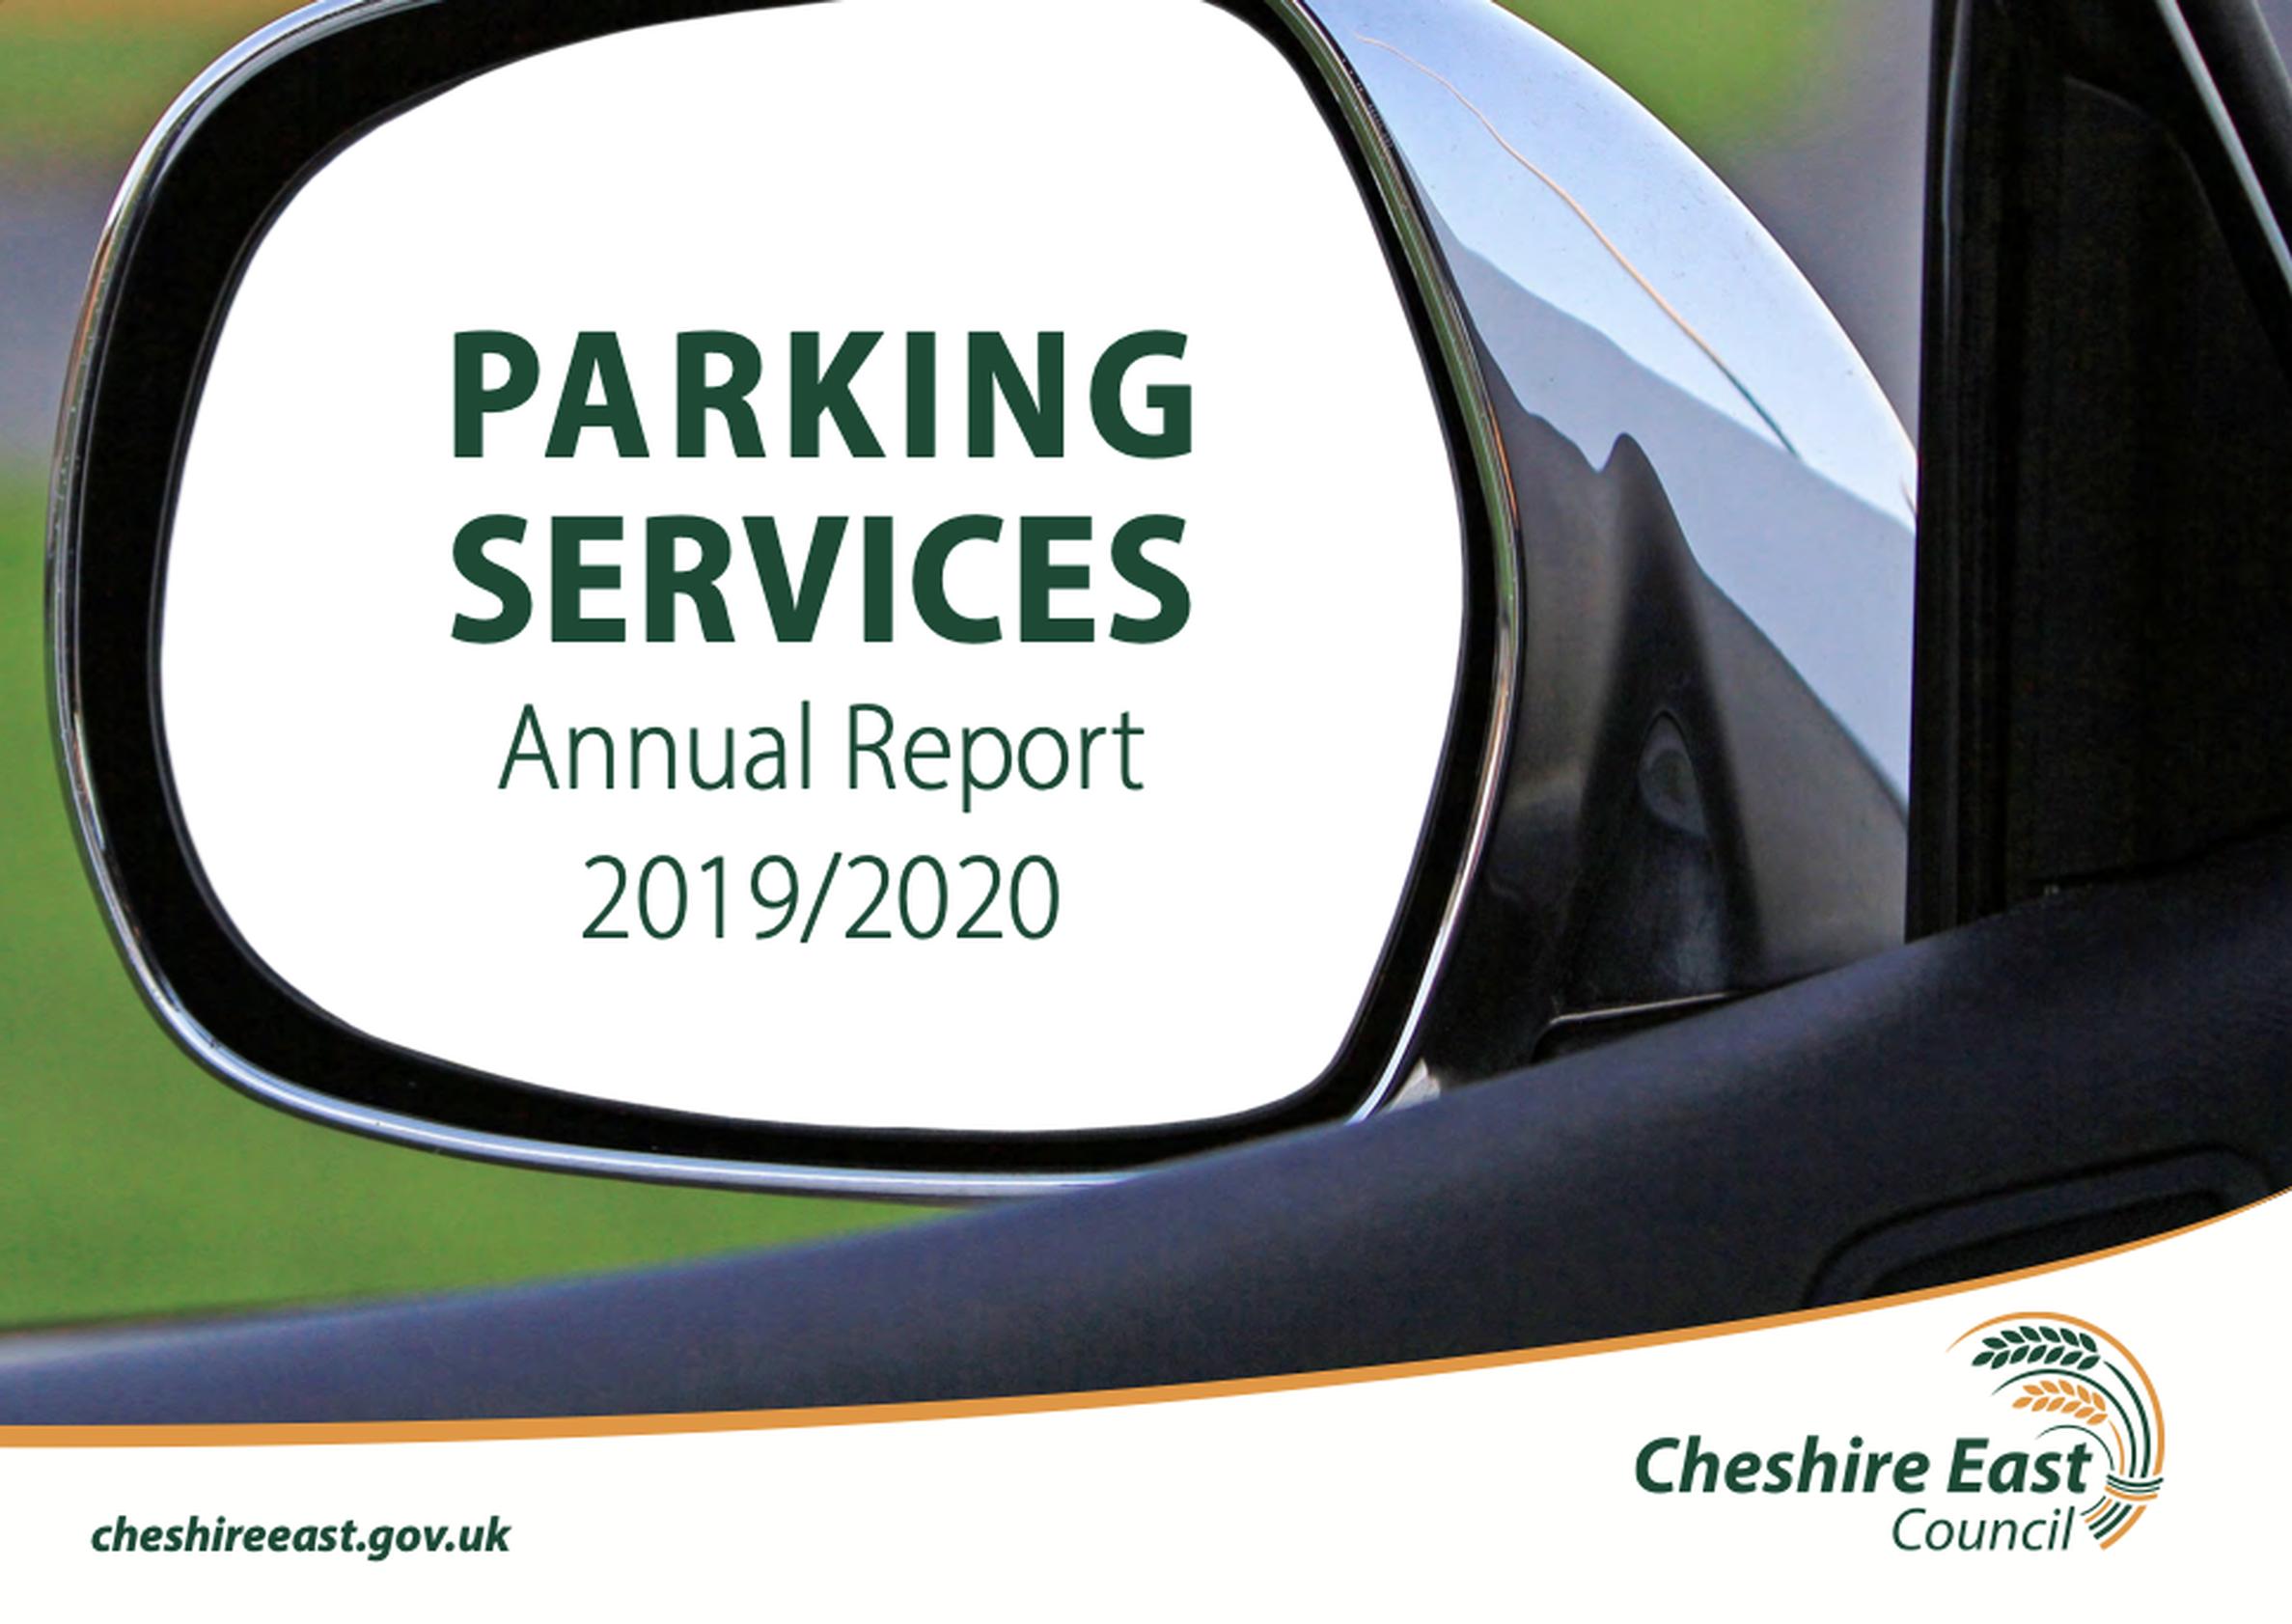 The Cheshire East Council parking annual report